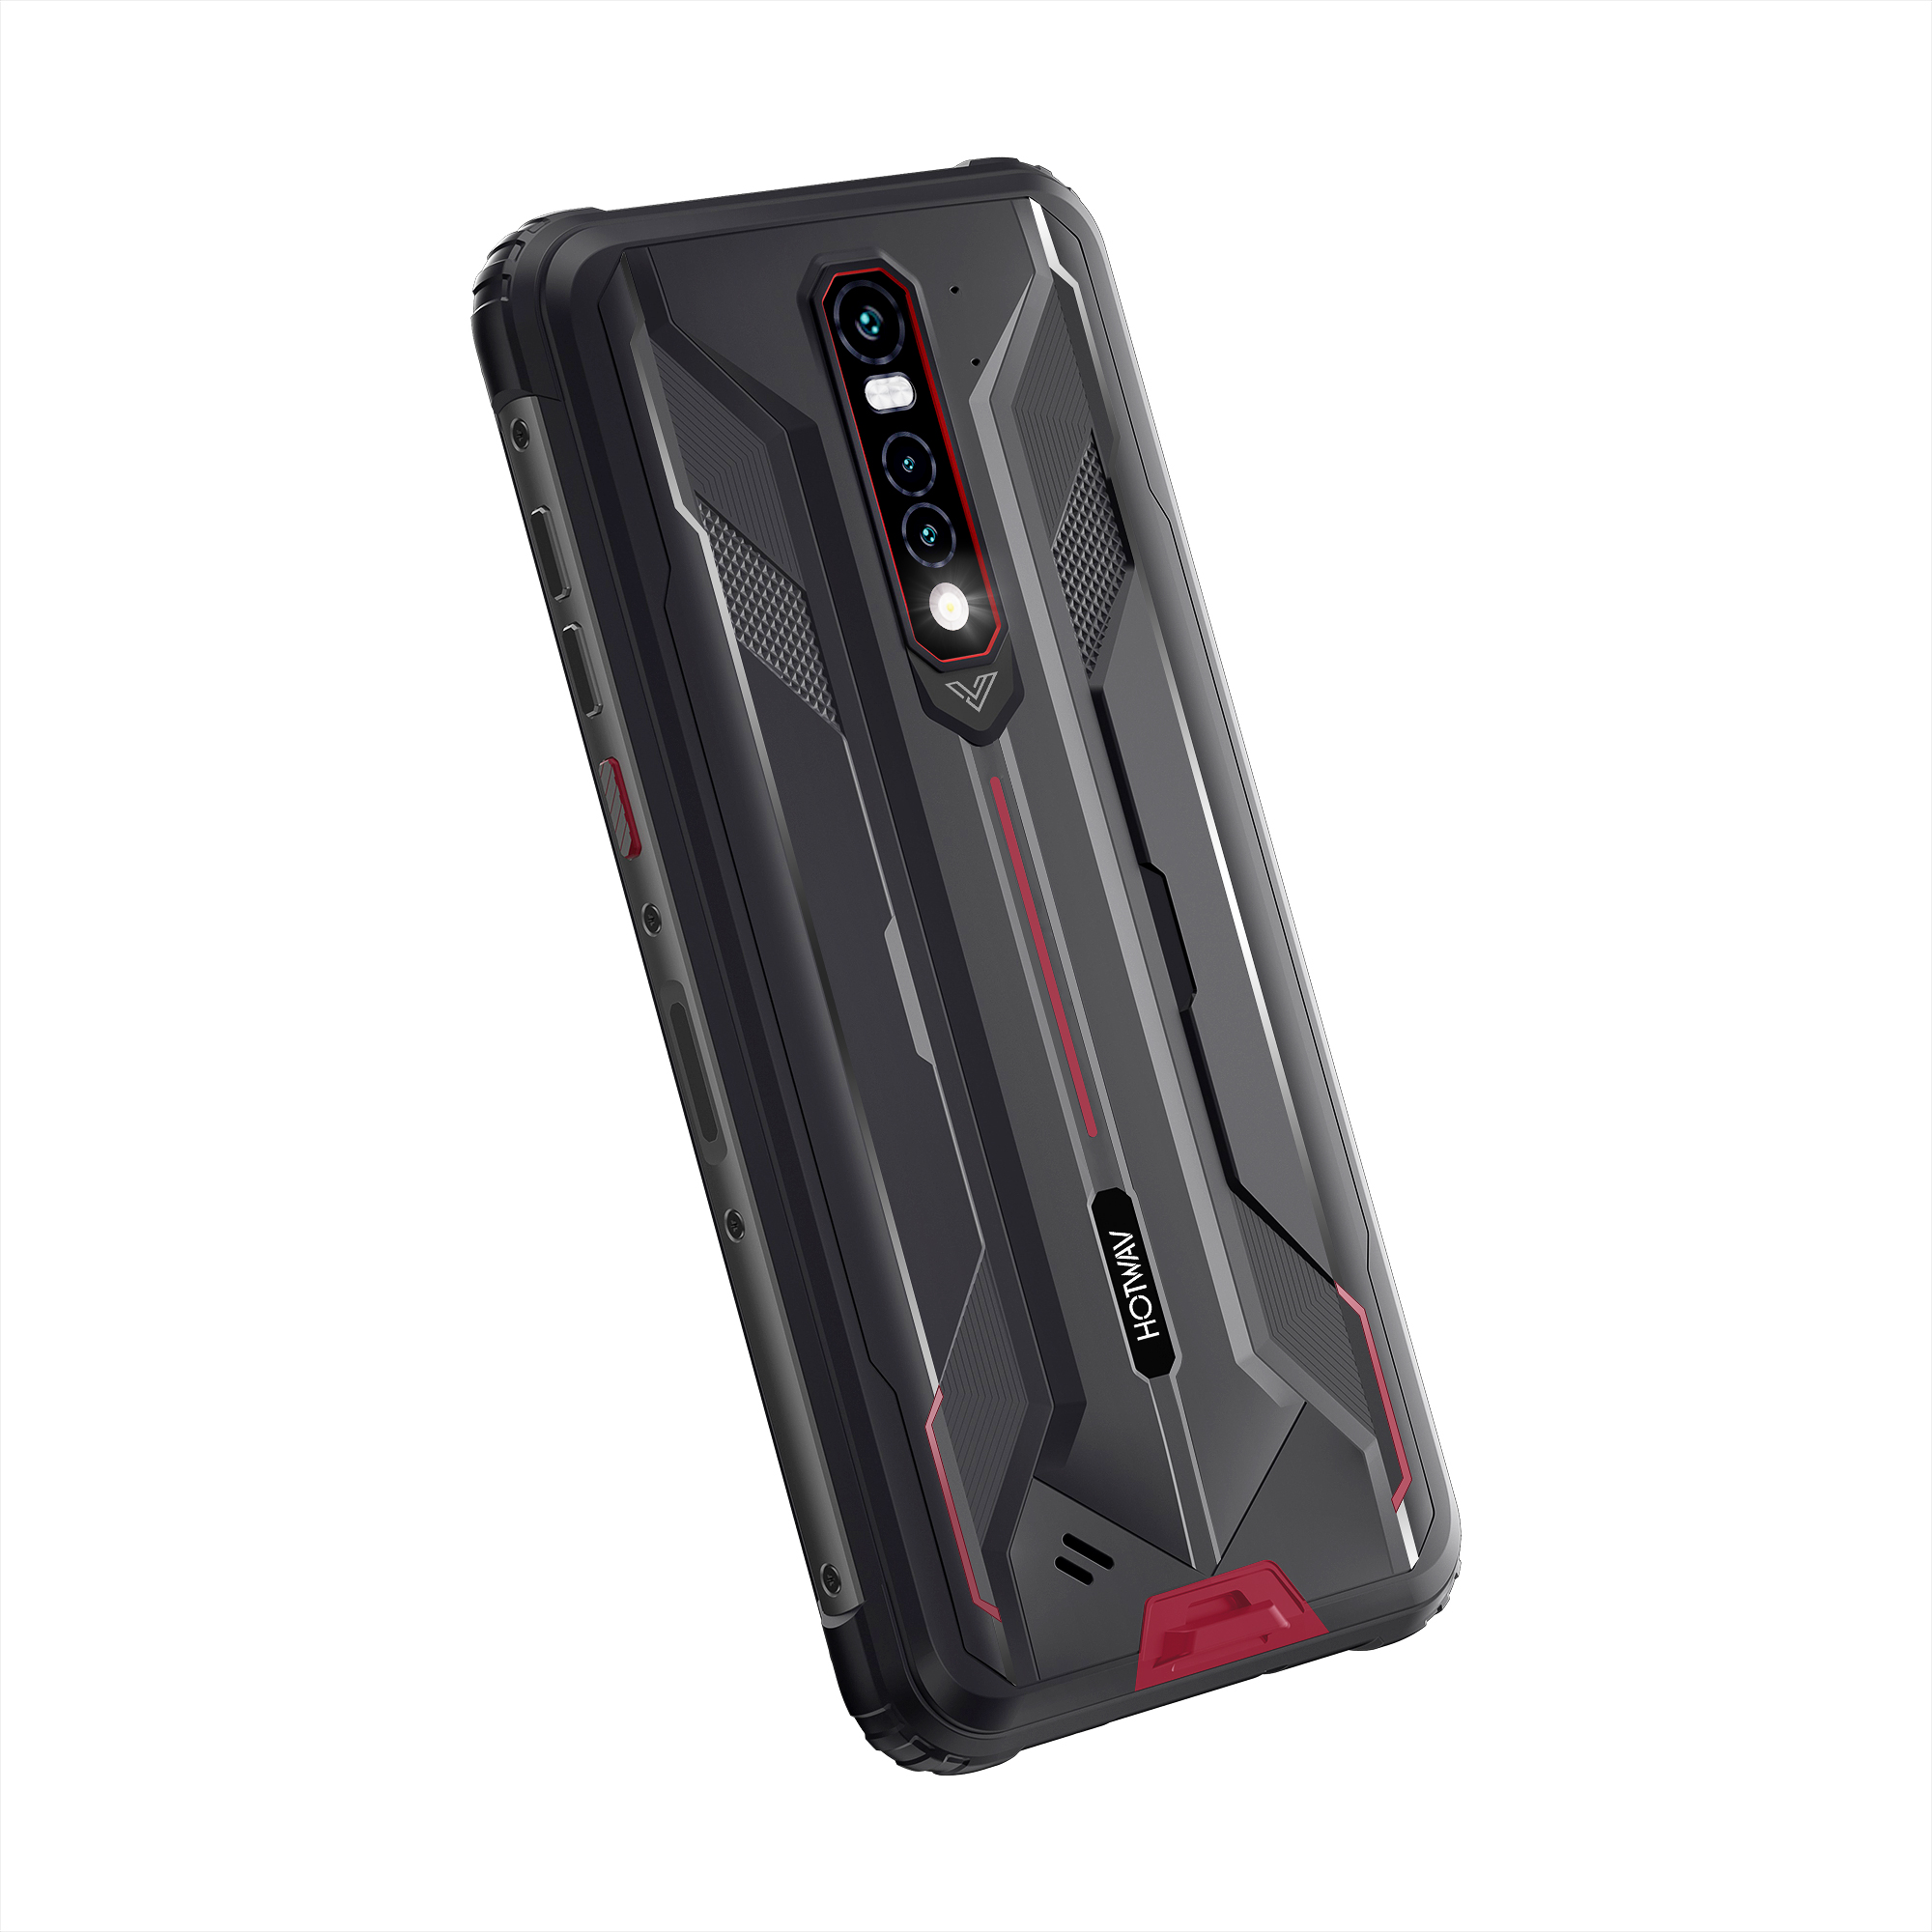 Find HOTWAV CYBER 8 Global Version 4GB 64GB IP68 IP69K Waterproof 8280mAh MT6762 16MP Triple Camera 6 3 inch NFC Android 11 Rugged Smartphone for Sale on Gipsybee.com with cryptocurrencies